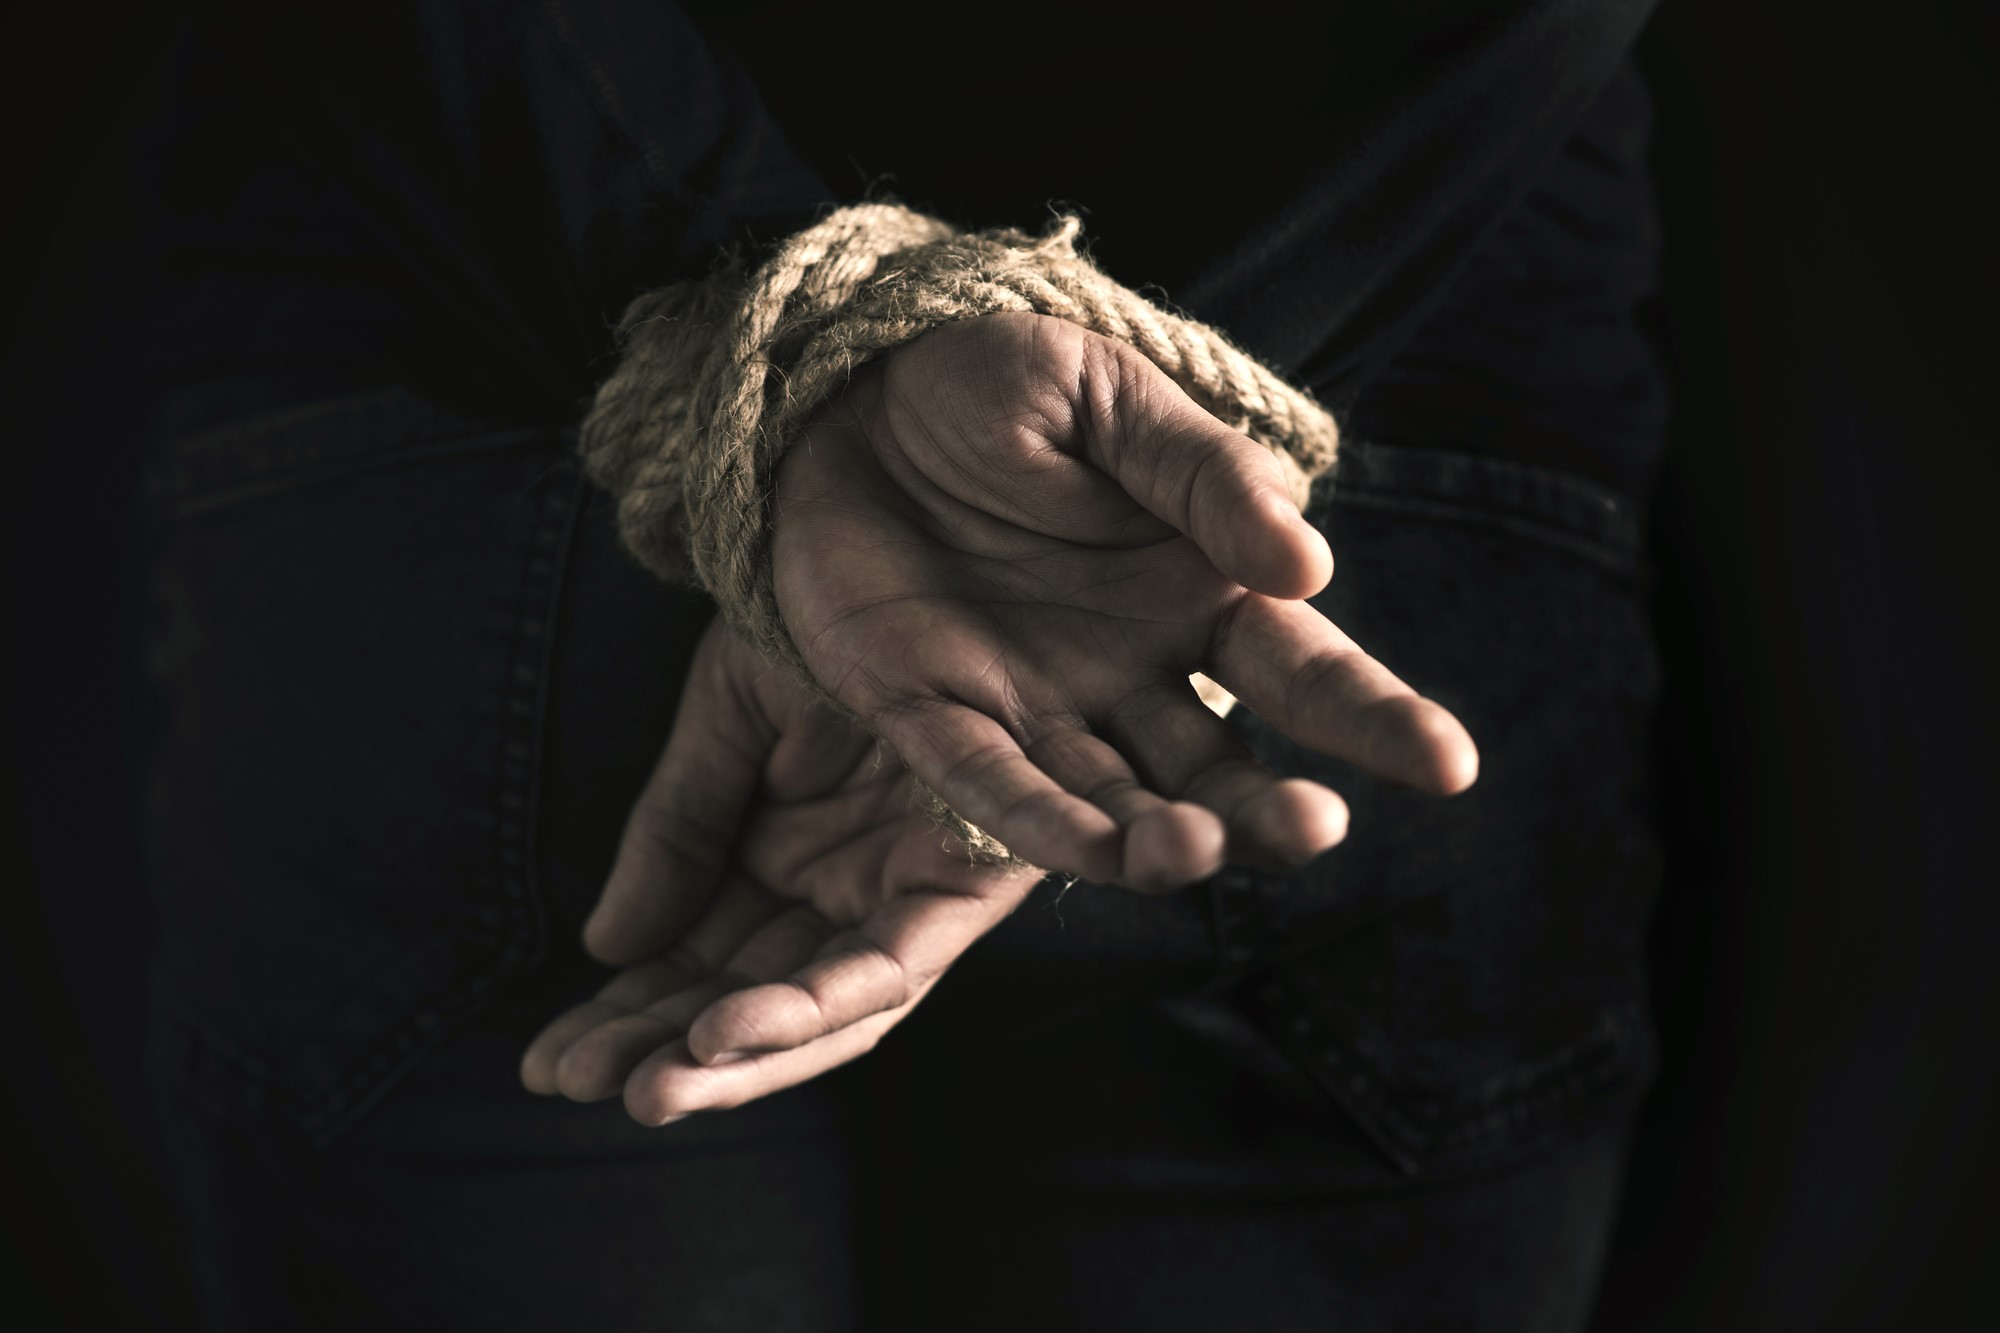 photograph of hands tied behind man's back